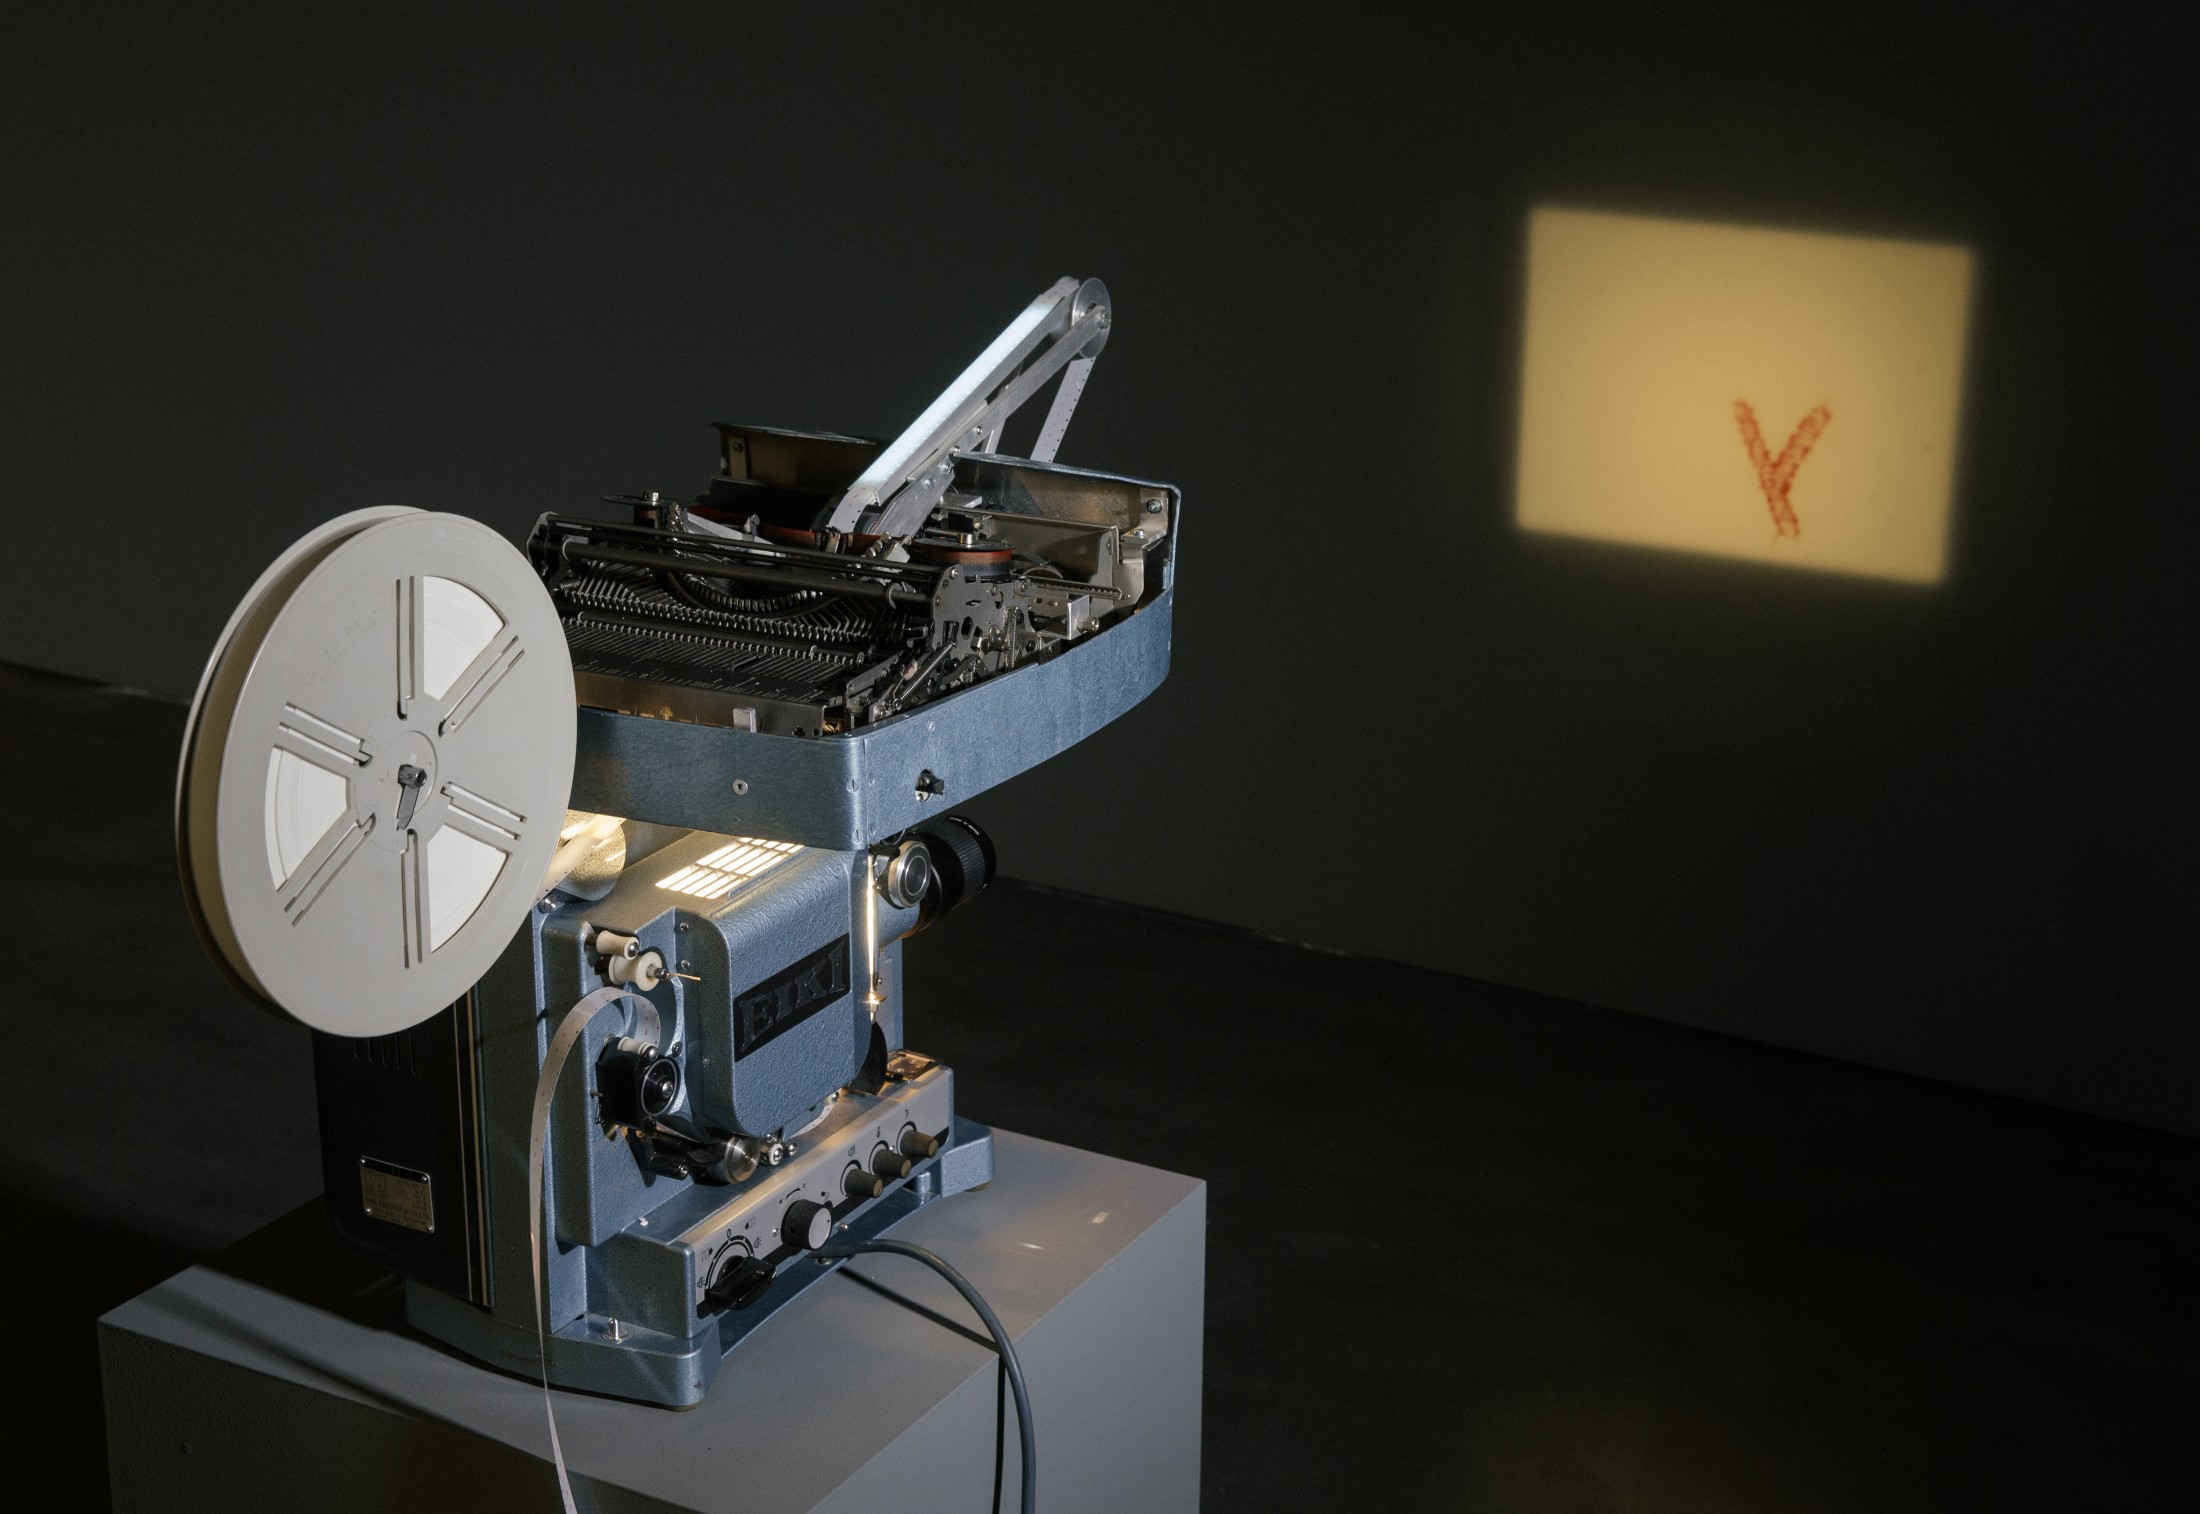 Rosa Barba, Spacelength Thought, 2012, 16 mm film, projector, typewriter, programming, dimensions variable, edition of 3. Exhibition view: Albertinum, Dresden, 2015. Photo © Oliver Killig